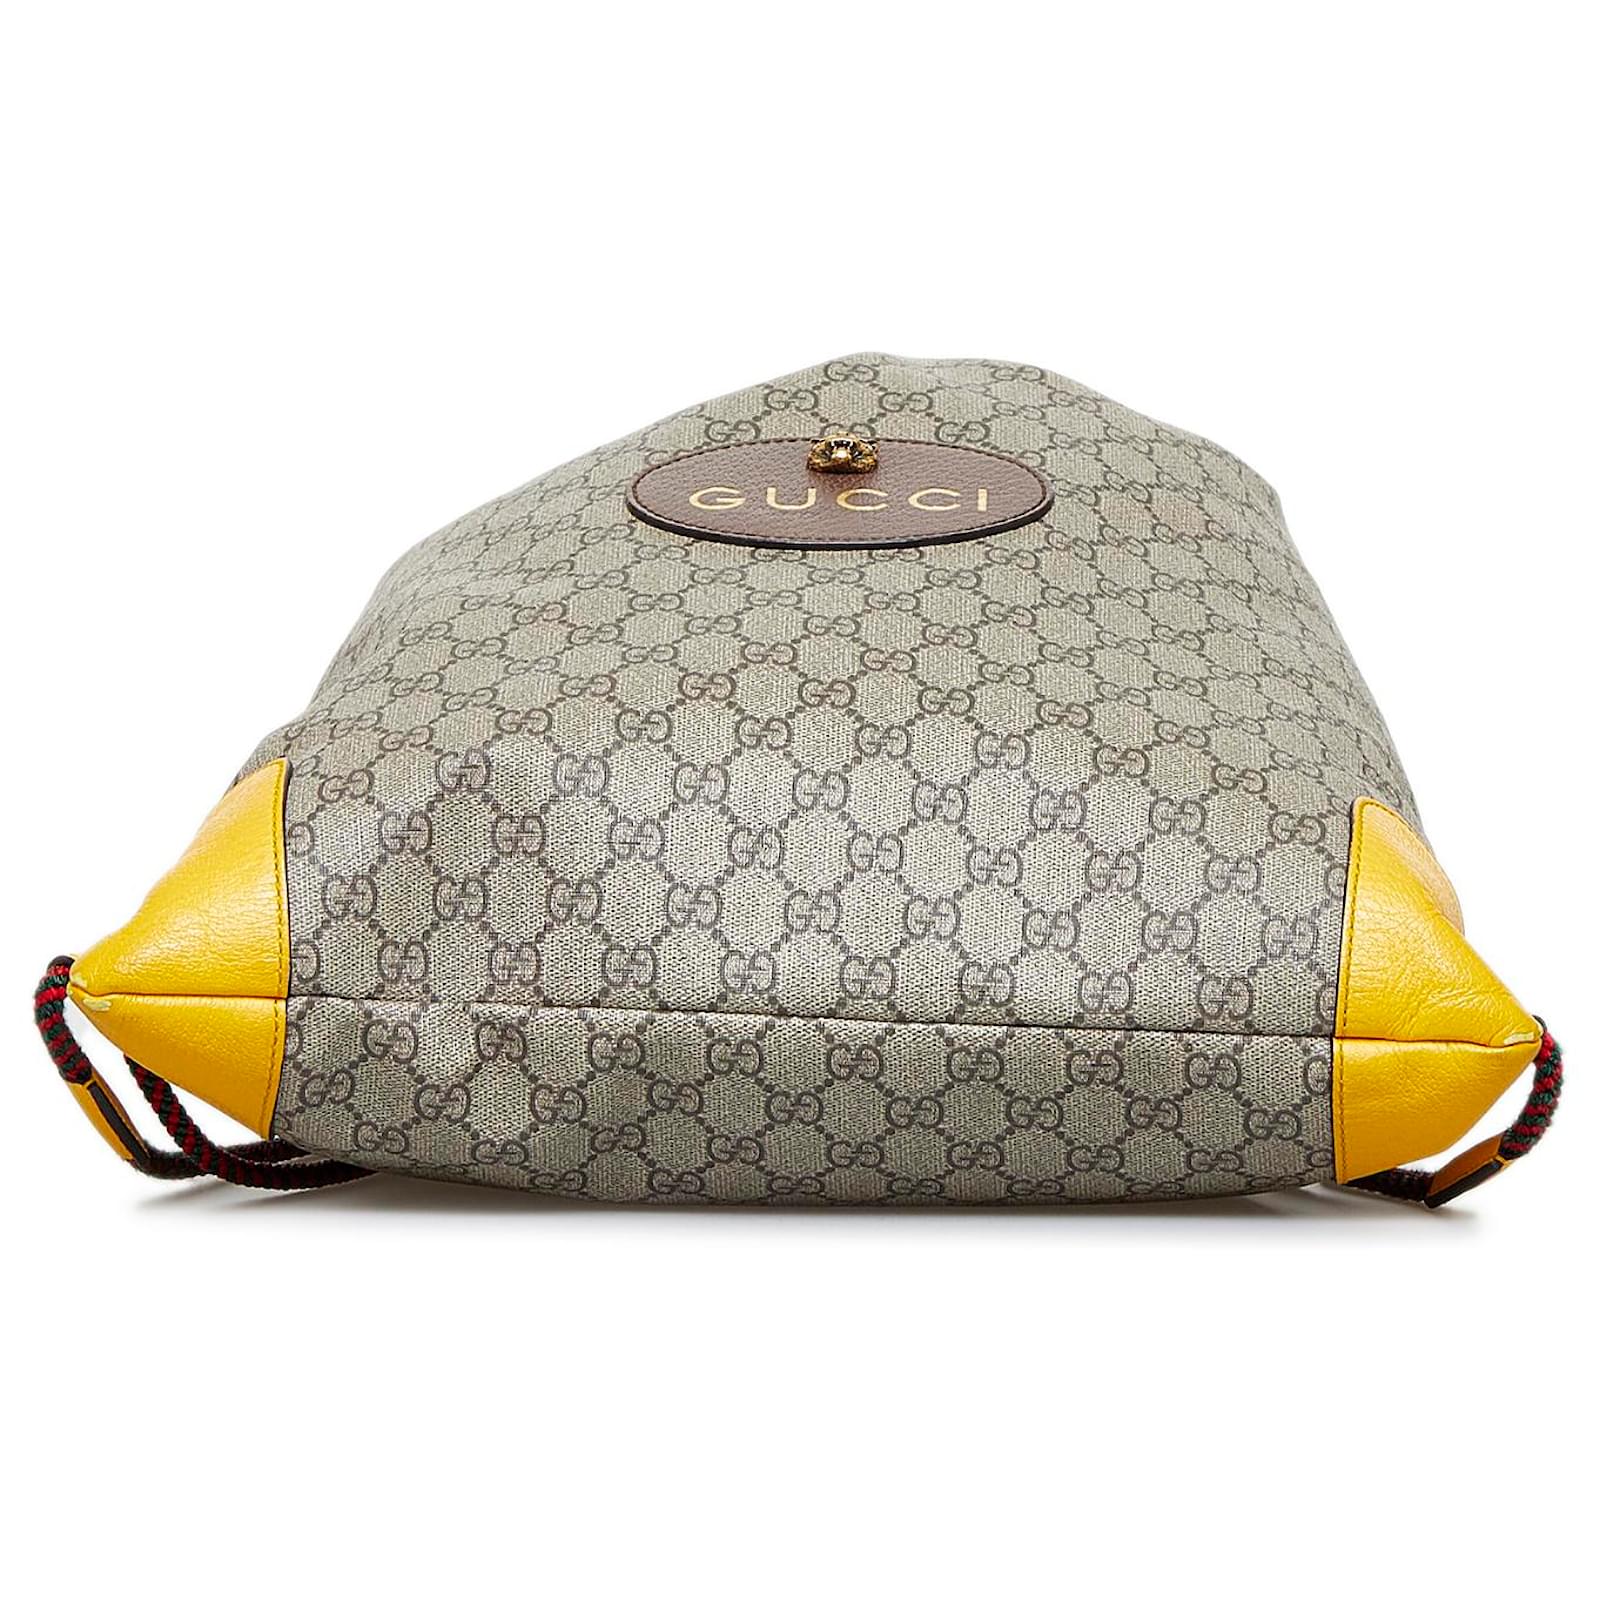 Neo Vintage GG Supreme pouch in Yellow Beige GG Canvas